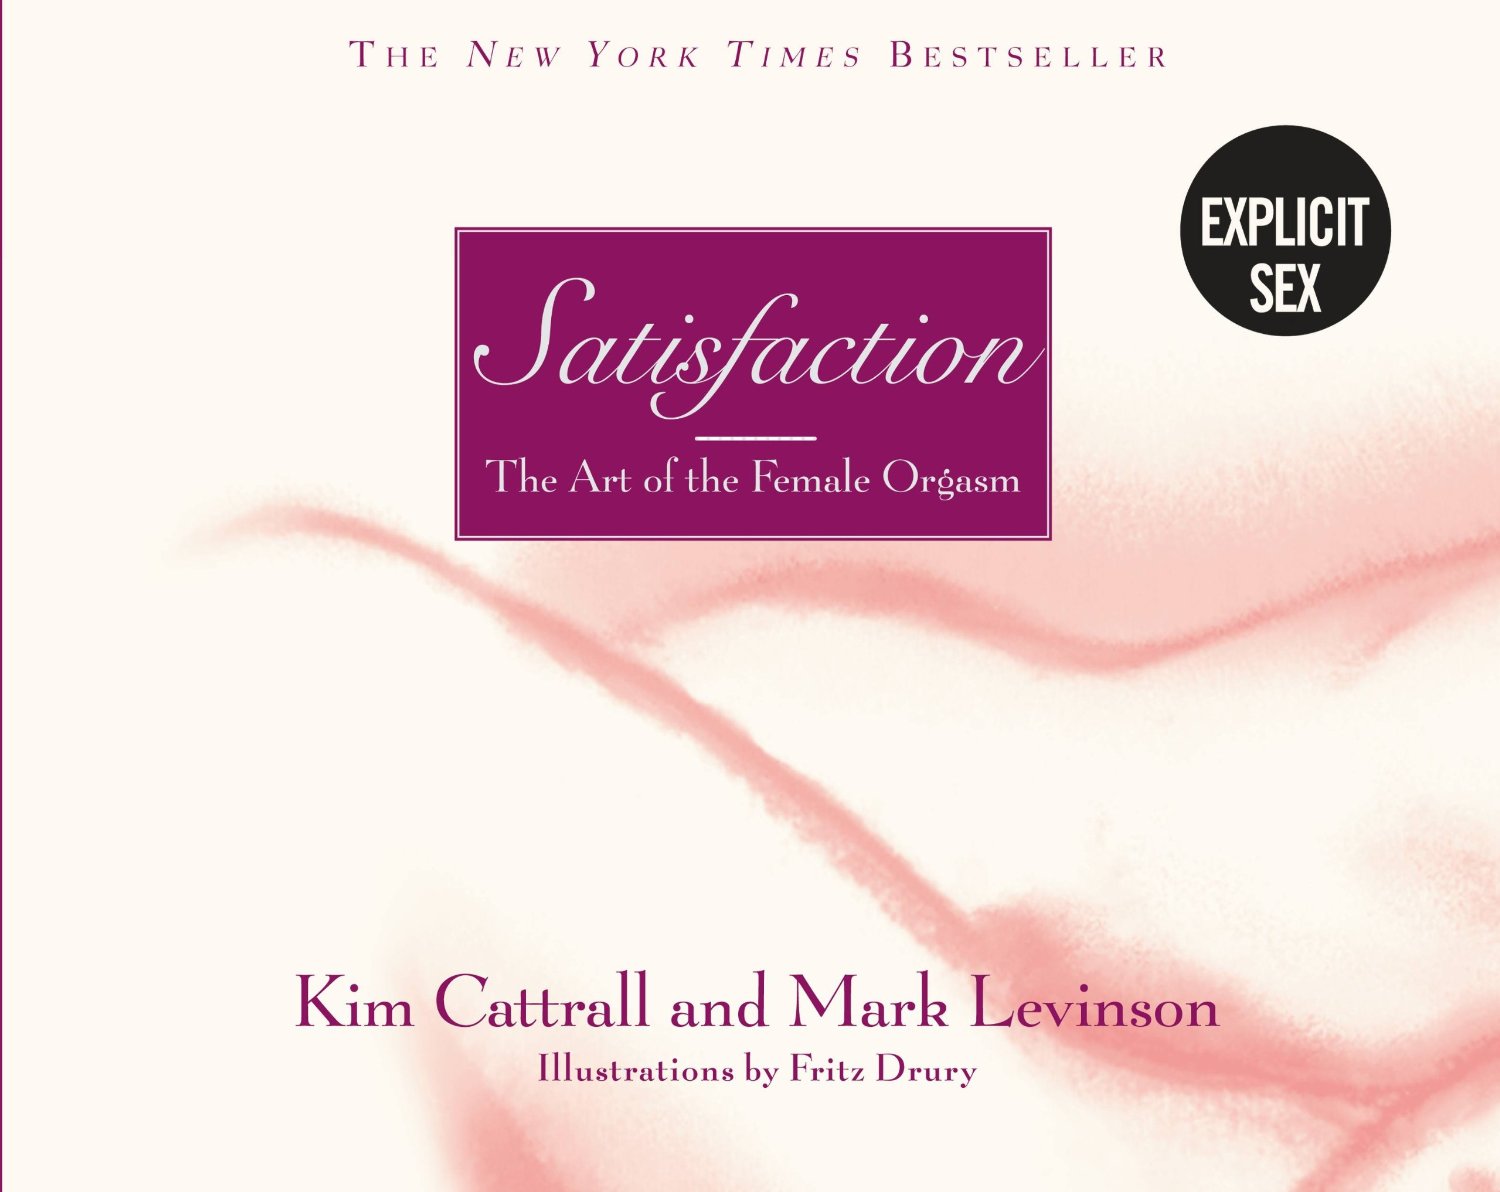 Review: "Satisfaction: The Art of the Female Orgasm", by Kim Cattrall and Mark Levinson 1